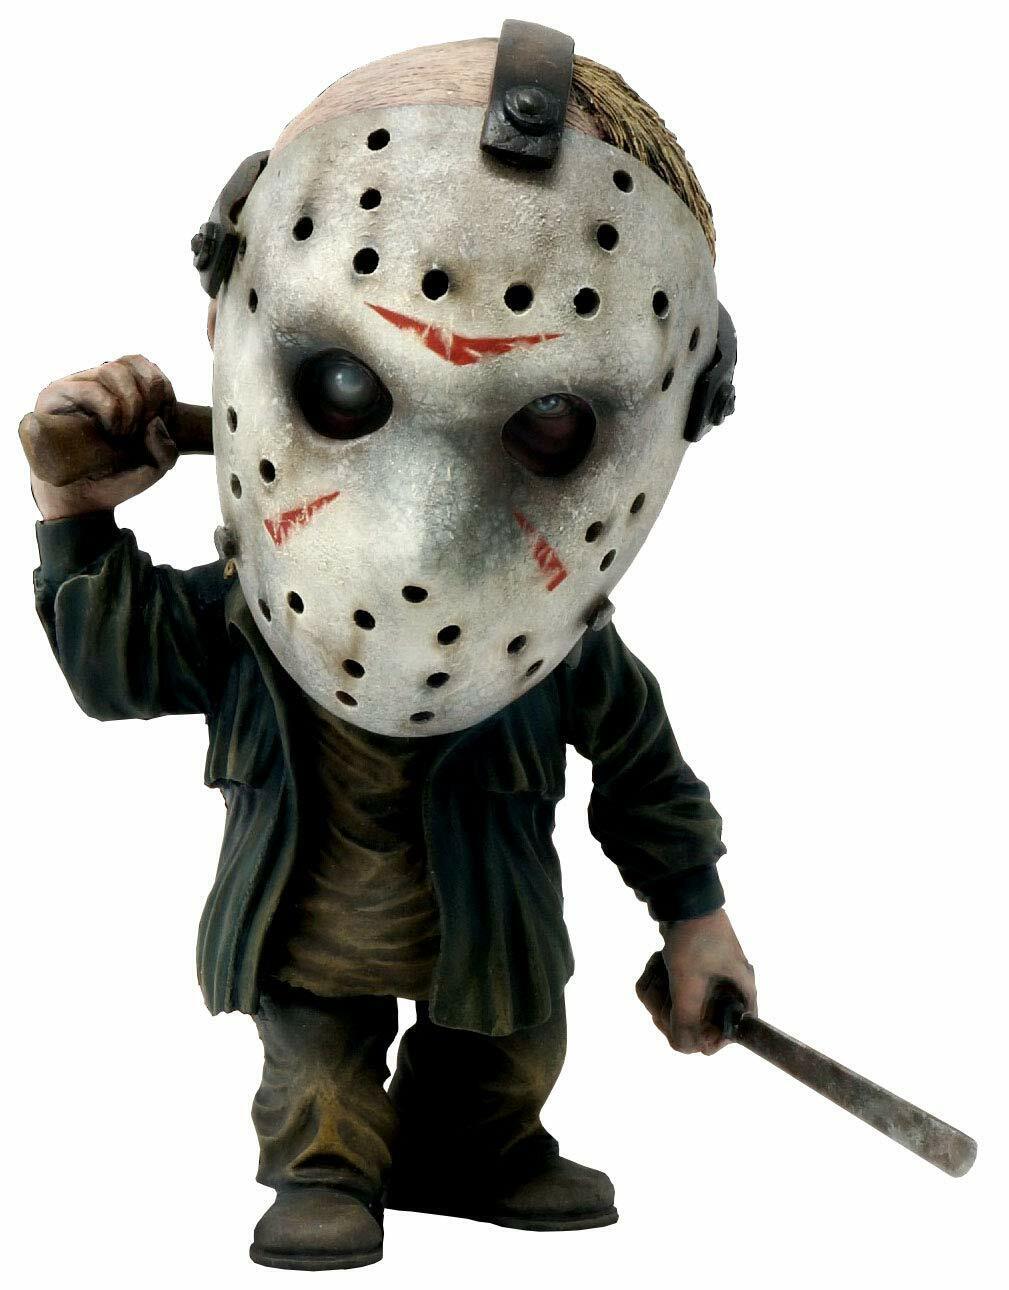 NEW X-Plus Star Ace Toys Default Jason Voorhees Deluxe Edition Figure Defo-Real